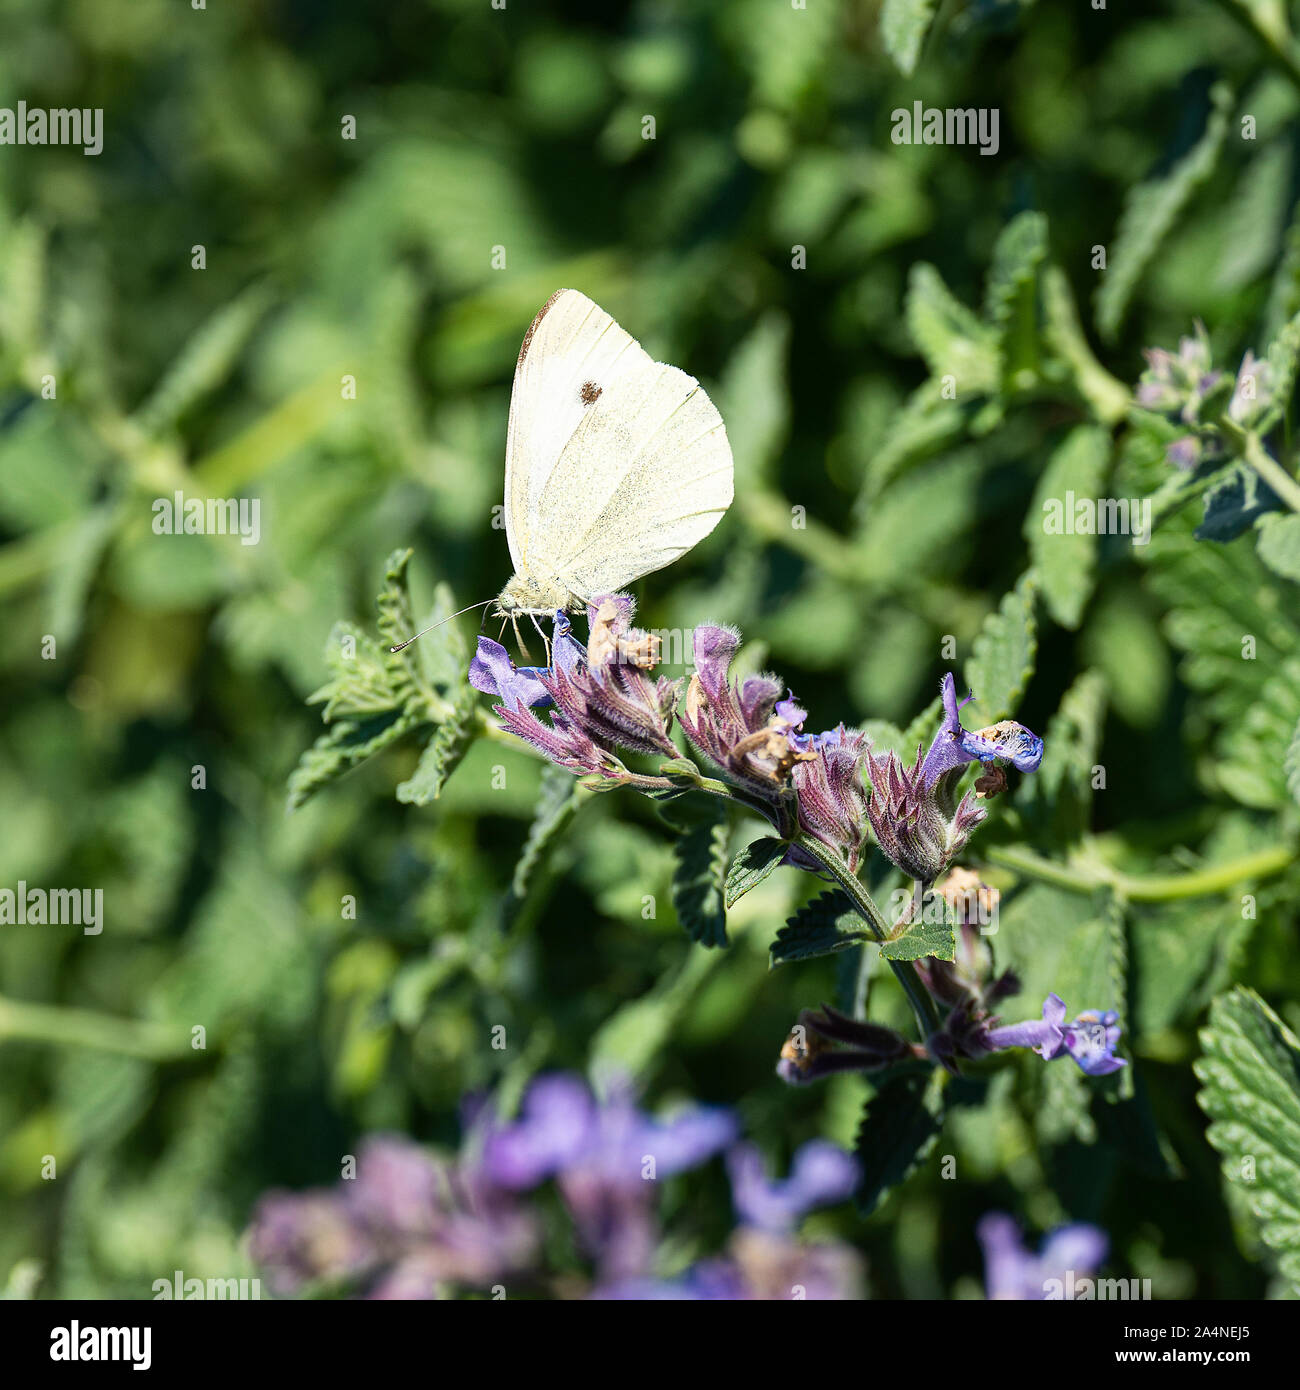 A Large White Cabbage Butterfly Feeding on Nectar on a Pale Blue Catmint Flower in a Garden at Sawdon North Yorkshire England United Kingdom UK Stock Photo